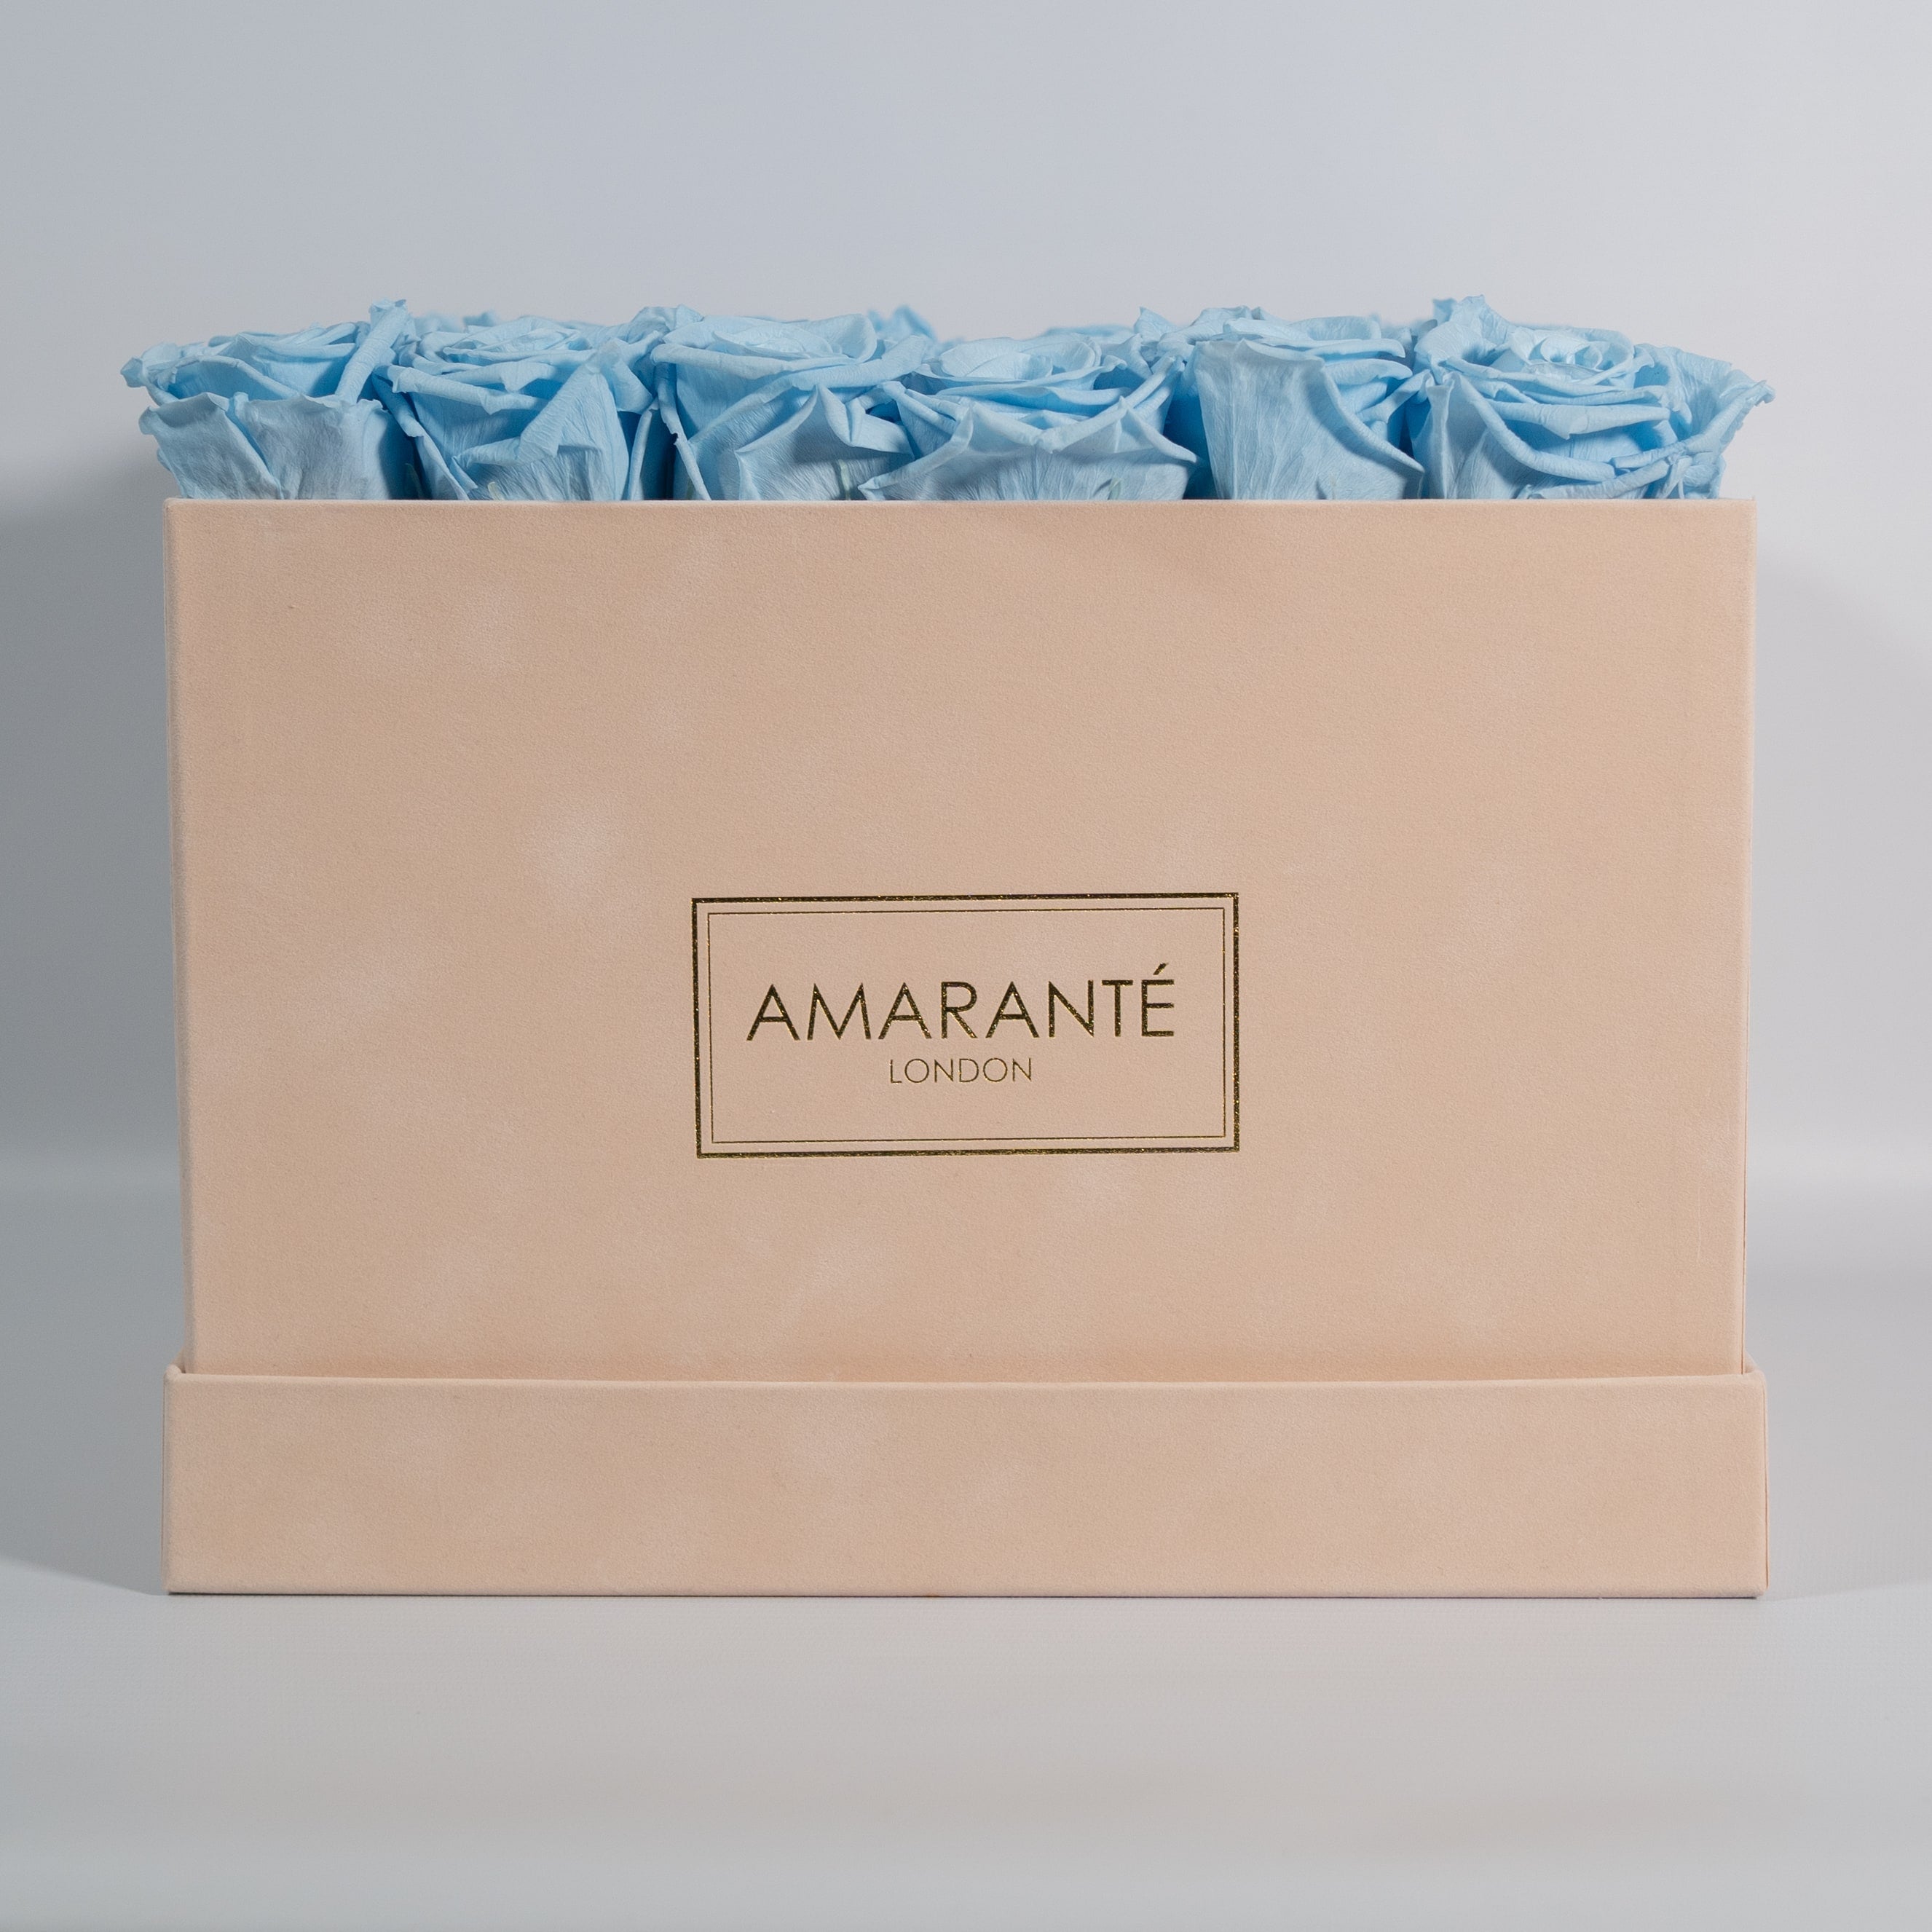 Illuminating light blue Roses in a sophisticated extra large box.